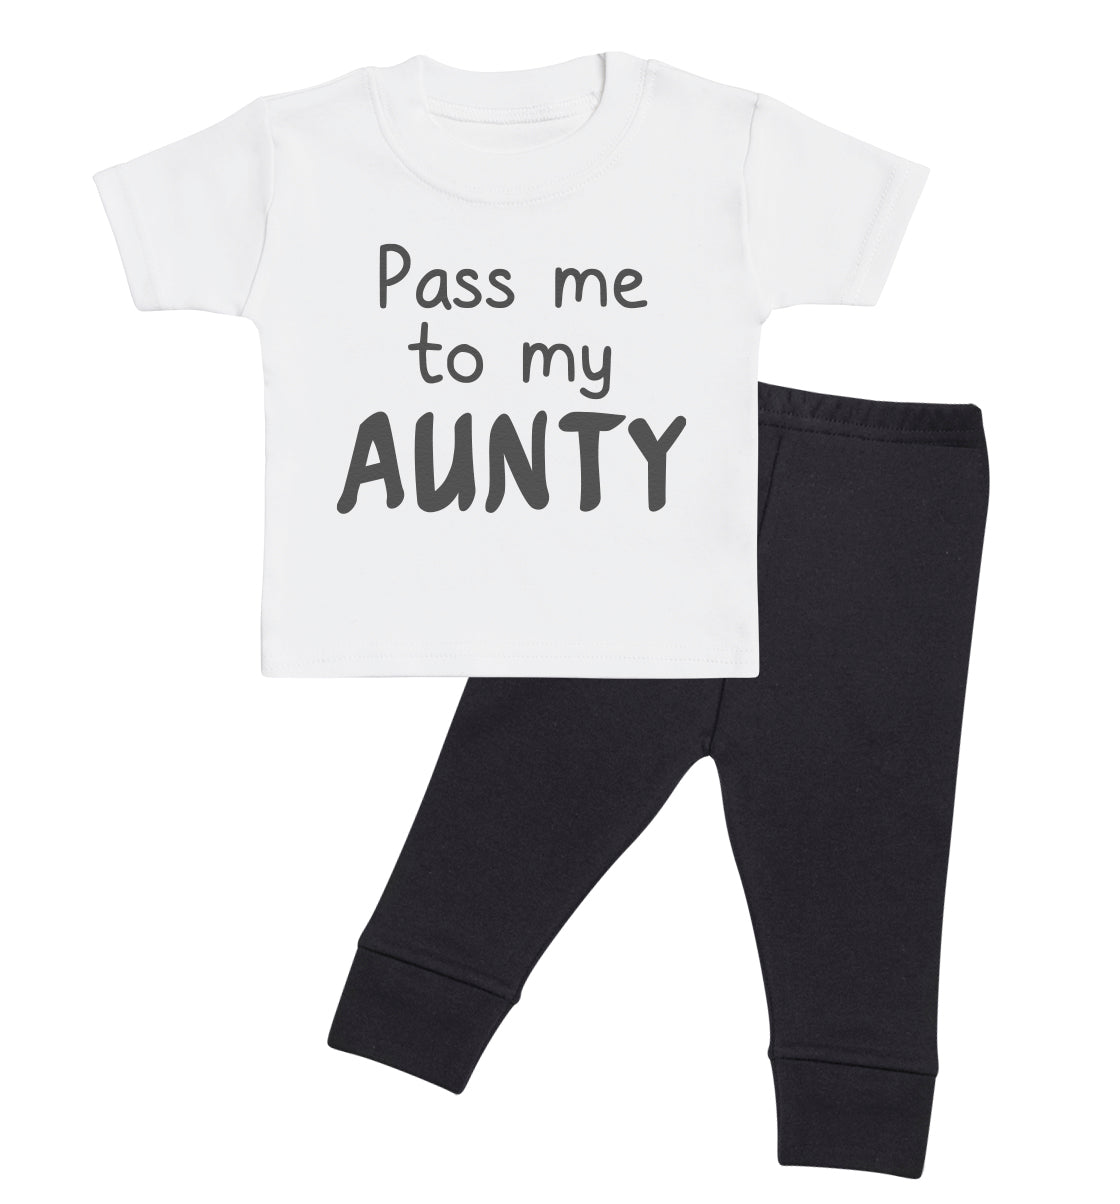 Pick A Family Name - Pass Me To My Mummy, Auntie, Grandad and more - Baby Outfit Set